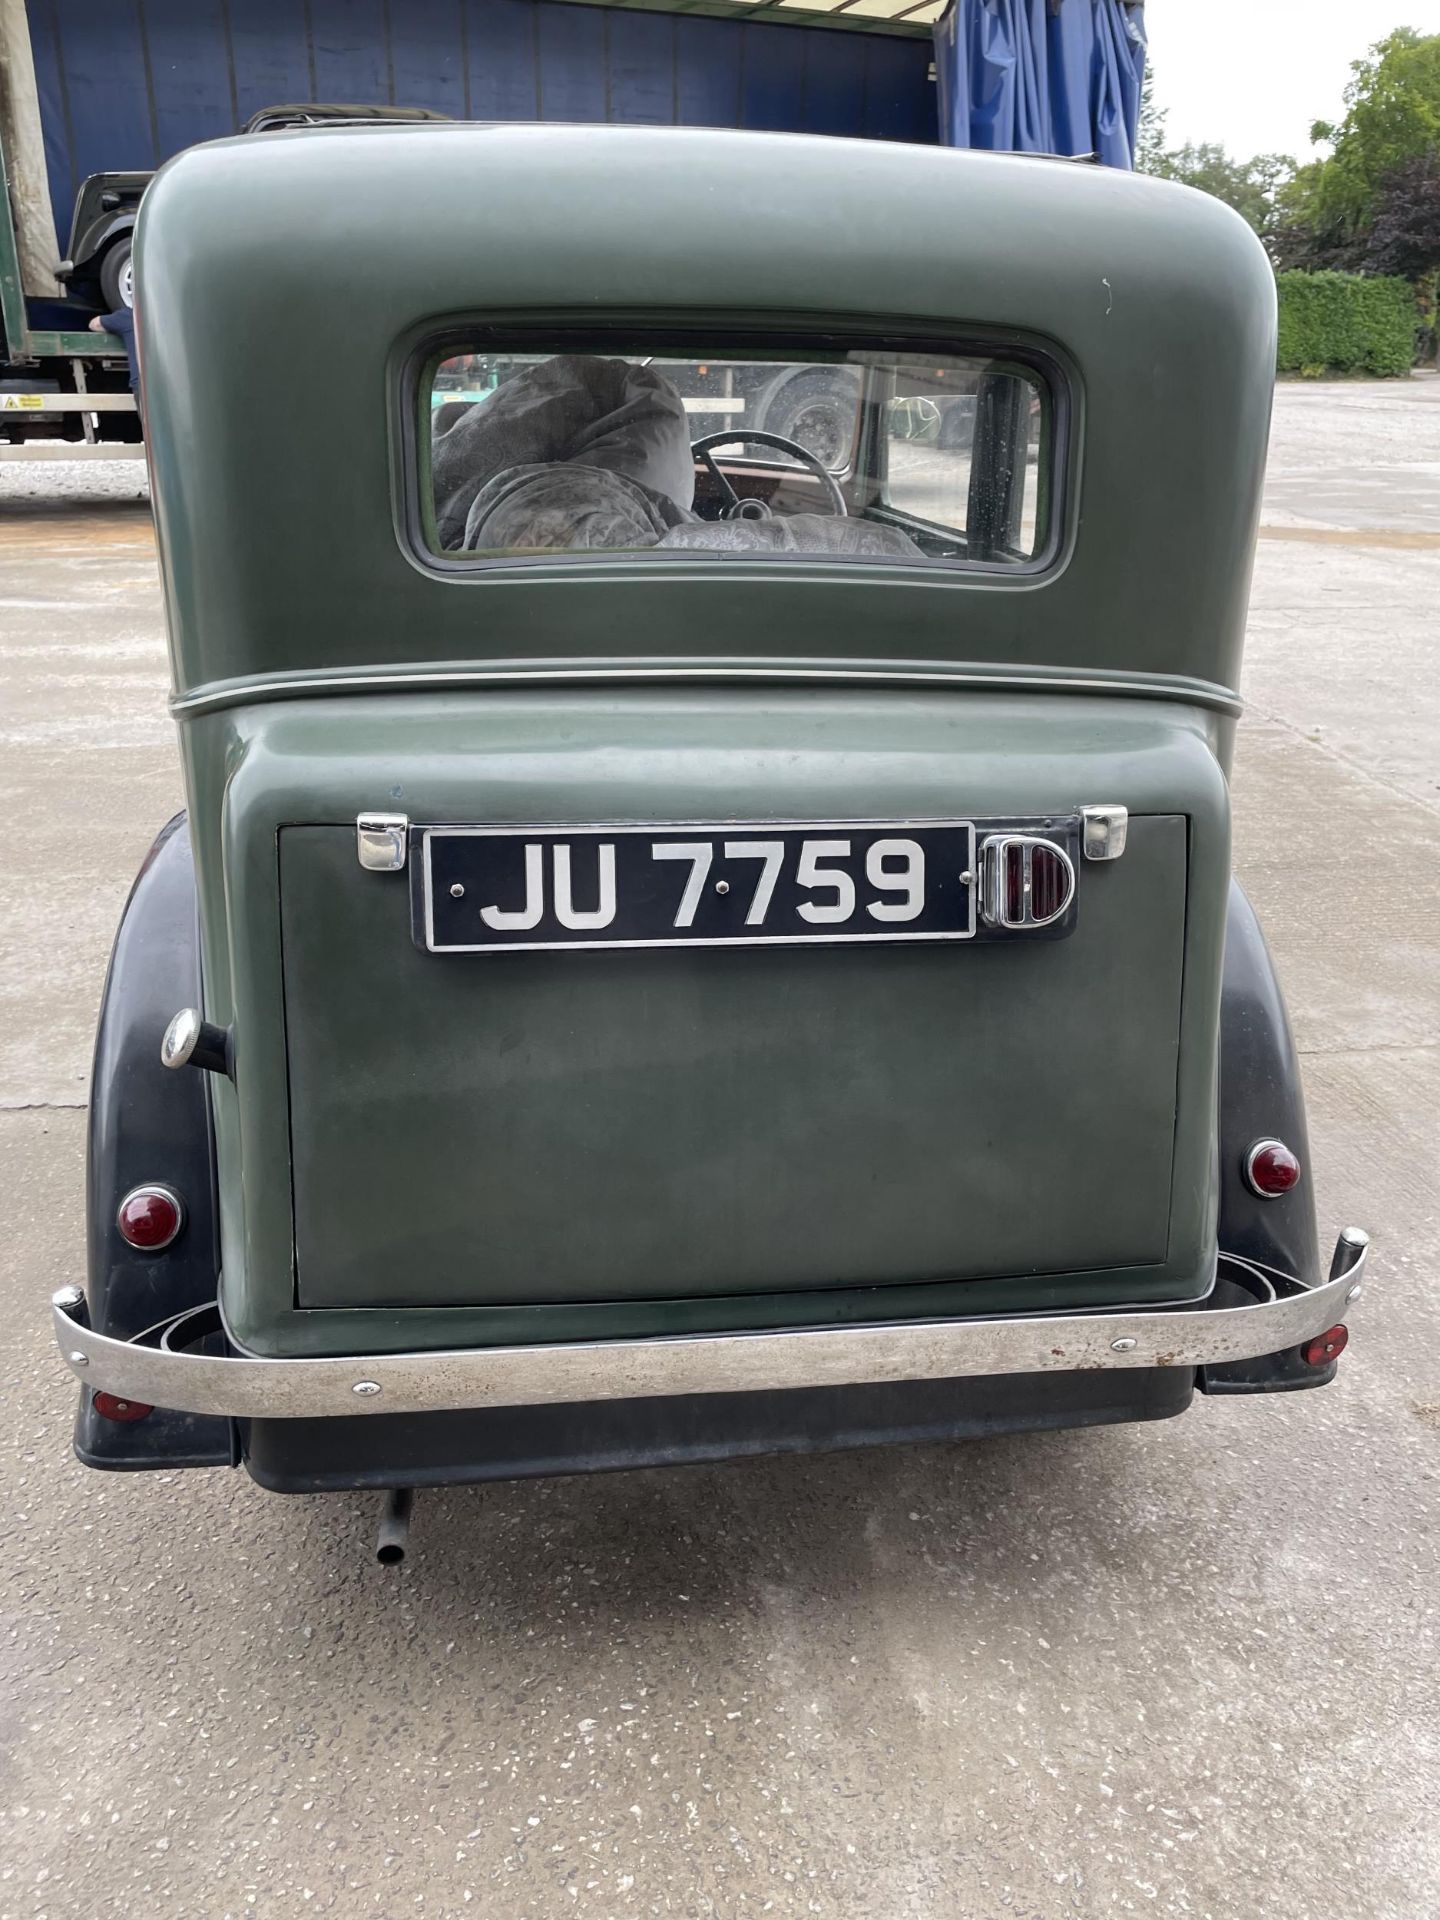 A 1935 AUSTIN 10 MOTOR CAR - REGISTRATION JU 7759, IN VERY GOOD CONDITION, STARTS AND RUNS, ON A V5C - Image 4 of 10